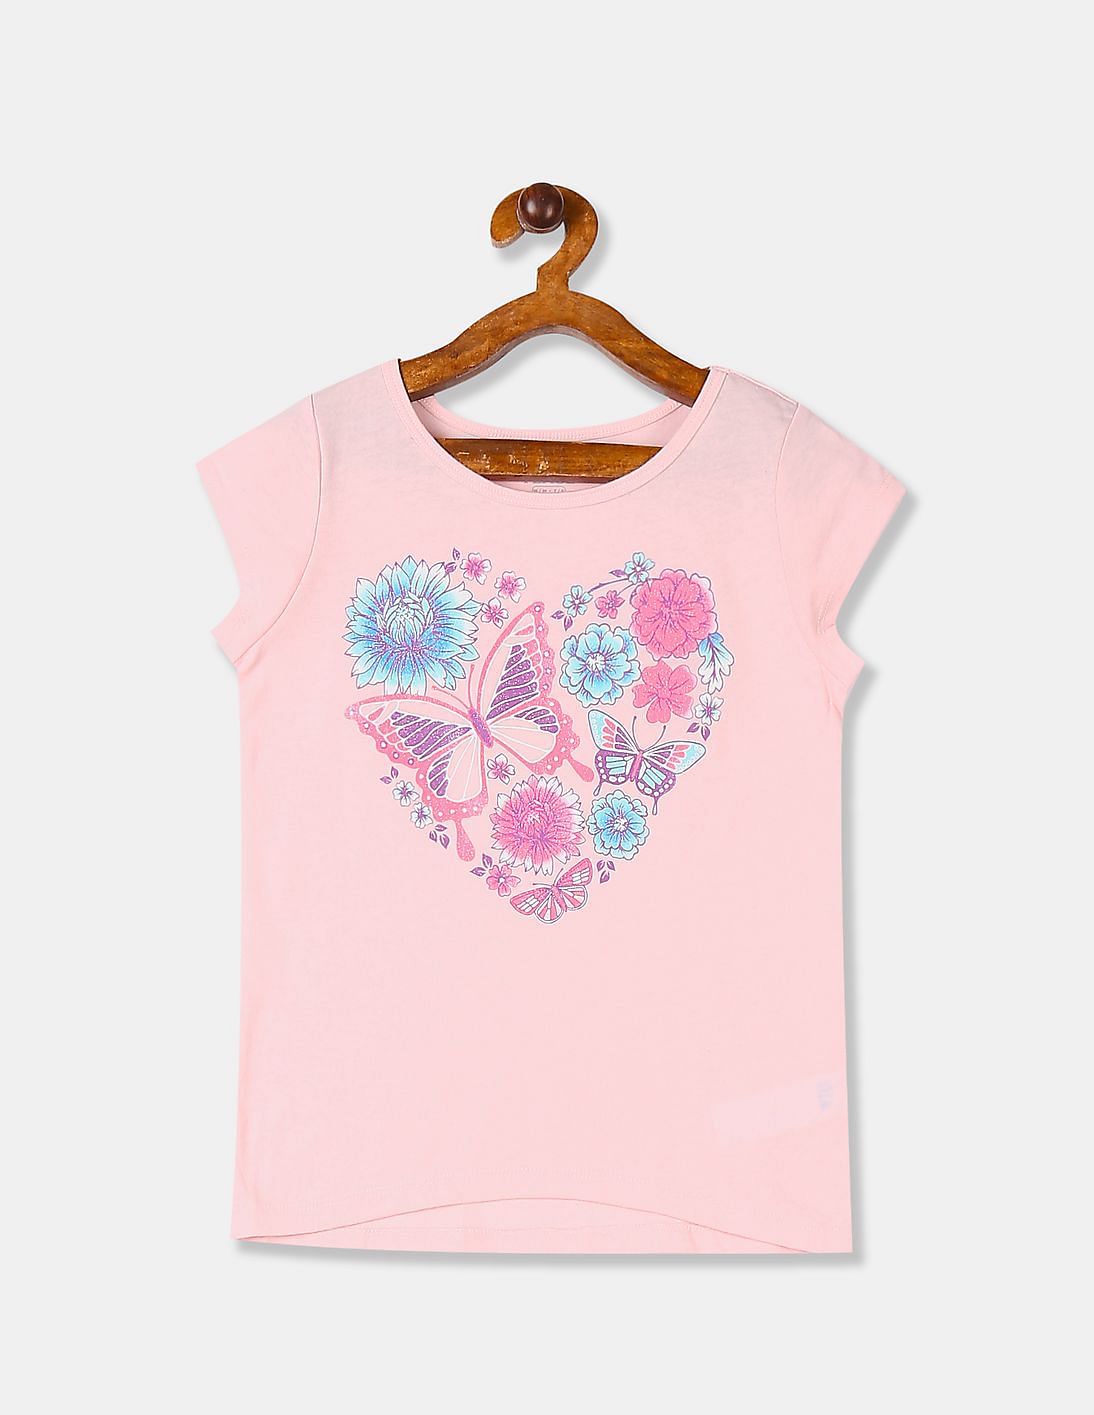 Buy The Children's Place Girls Girls Pink Round Neck Graphic T-Shirt ...